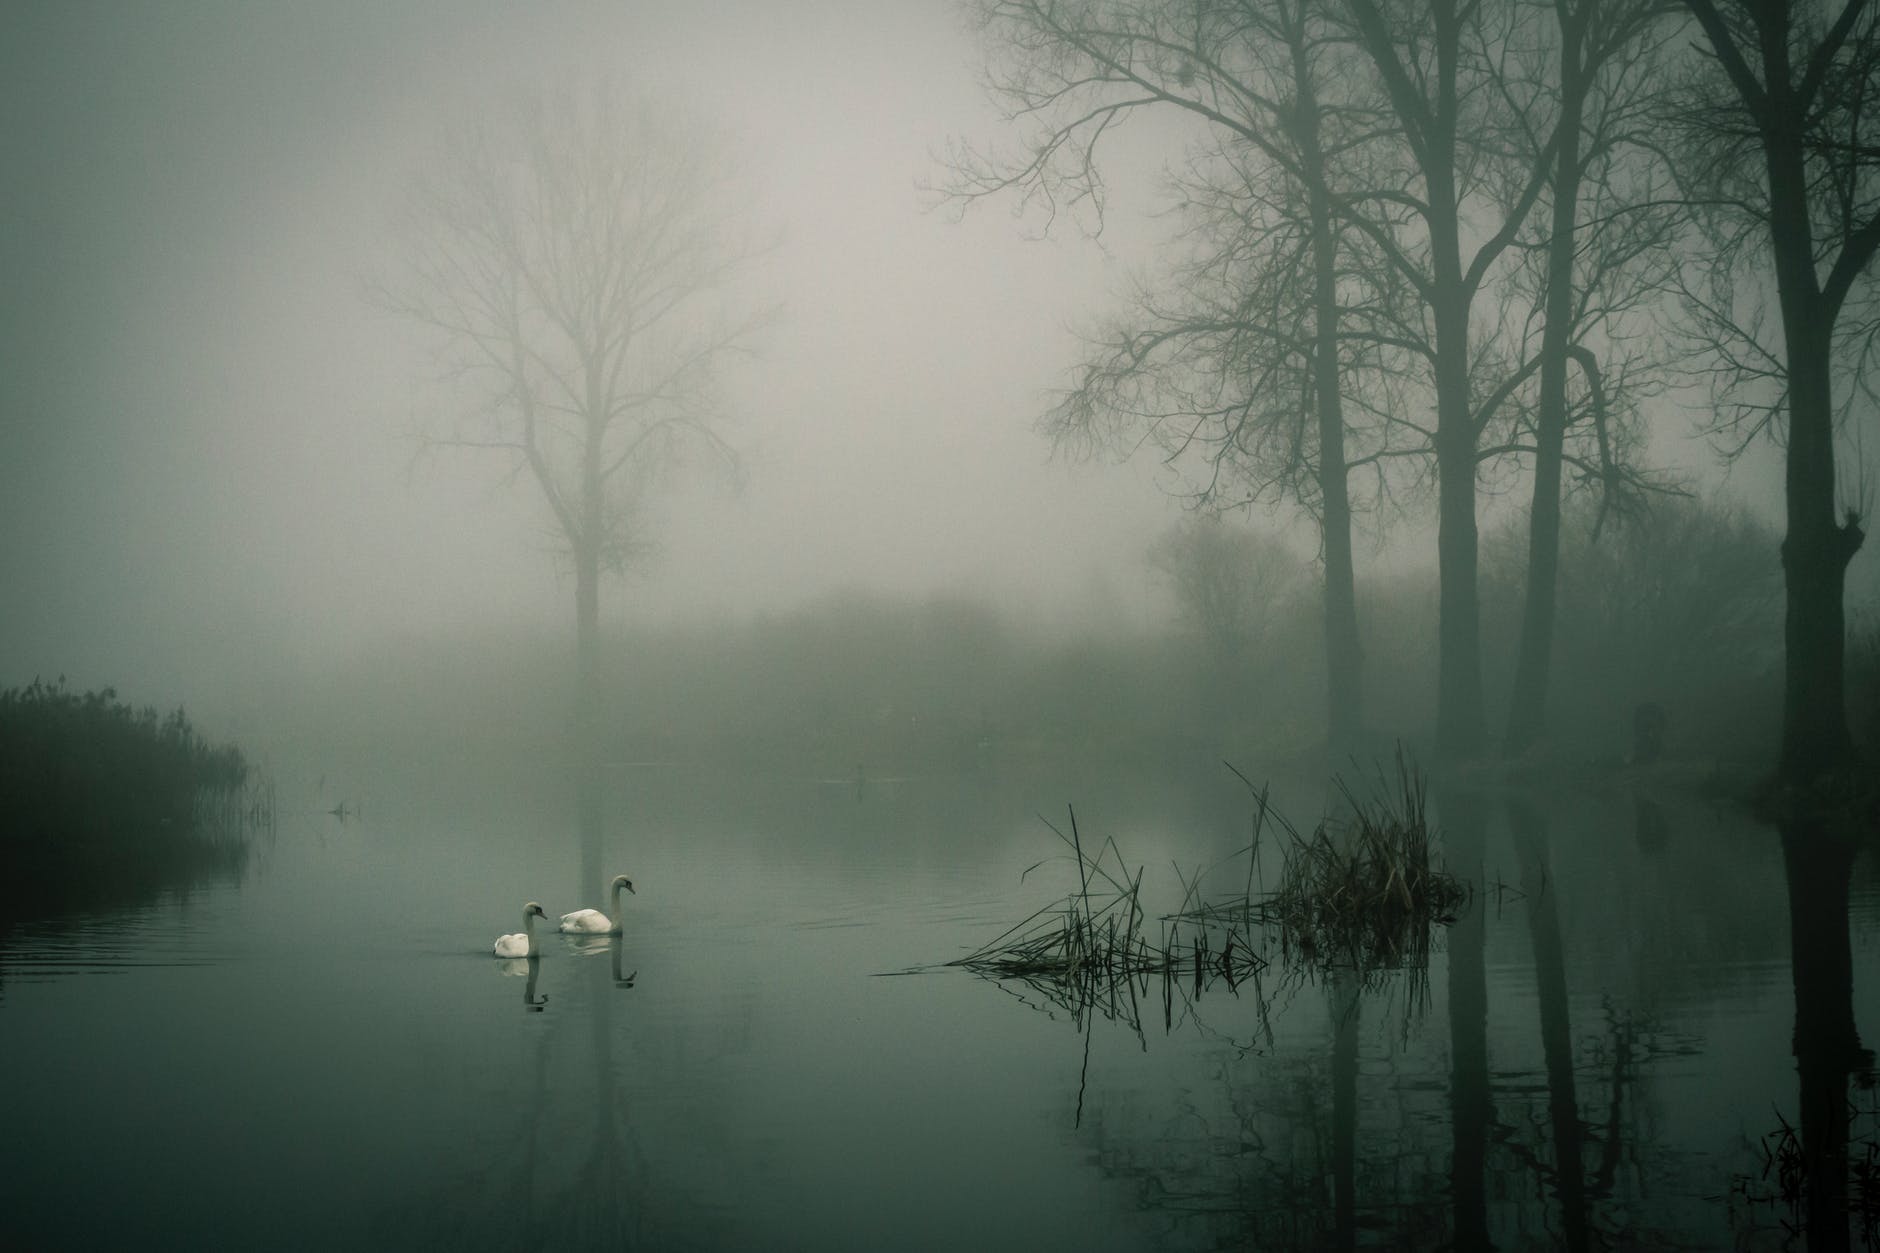 extreme fog clouds a lake with 2 swan